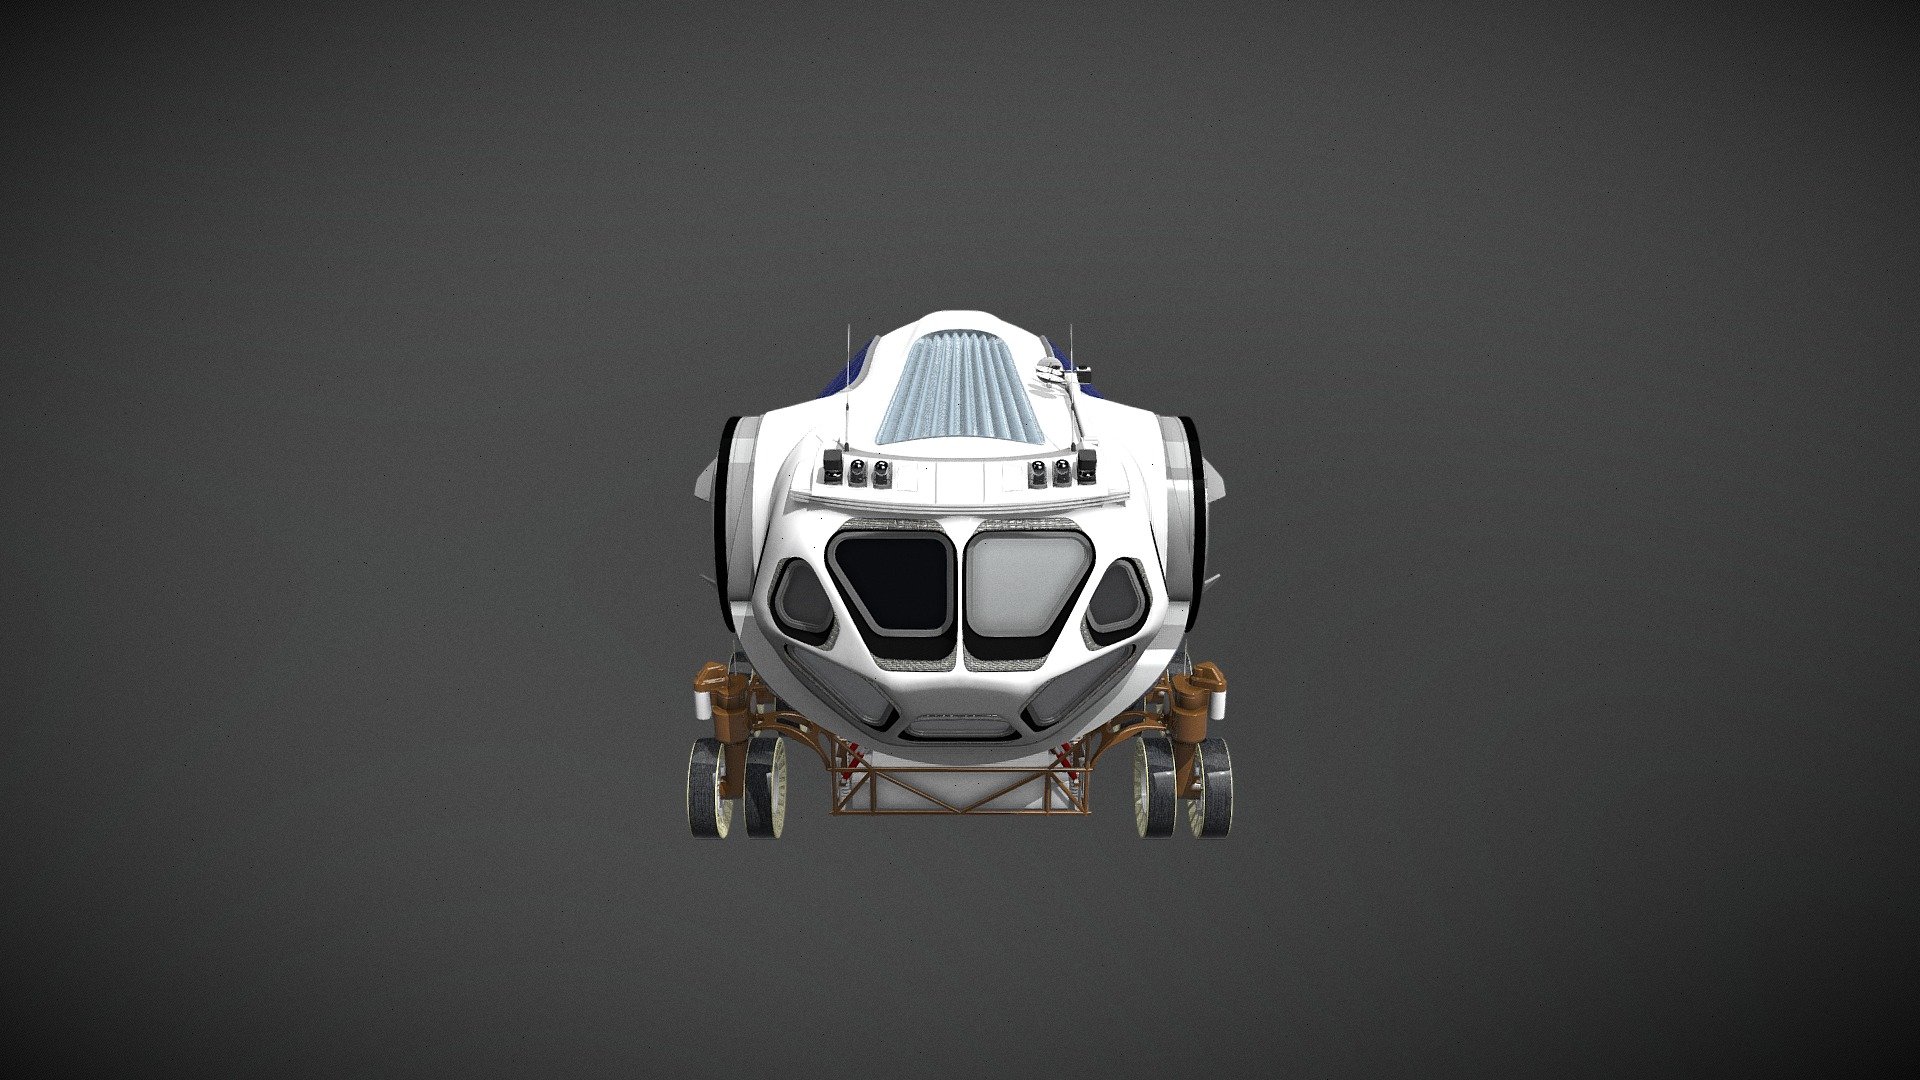 Relevant Mission: Notional Mars Surface Systems
Date Added: July 20, 2015

*copyright: nasa3d.arc

The Space Exploration Vehicle (SEV) concept is designed to be flexible depending on the destination; the pressurised cabin can be used both for missions in space and for exploration of the surface of planetary bodies, including near-Earth asteroids and Mars. The surface exploration version of the SEV has the cabin mounted on a chassis, with wheels that can pivot 360 degrees and travel at about 10 kilometres per hour in any direction. It is about the size of a pick-up truck (with 12 wheels) and can accommodate two astronauts for up to 14 days with sanitary and sleeping facilities. Similarly, the space version of the SEV would have the same pressurised cabin on a flying platform; it would also allow two astronauts to stay for 14 days.
erficie de cuerpos planetarios, incluidos asteroides cercanos a la Tierra y Mat - Space Exploration Vehicle - 3D model by Pablo (@manabu_dev) 3d model